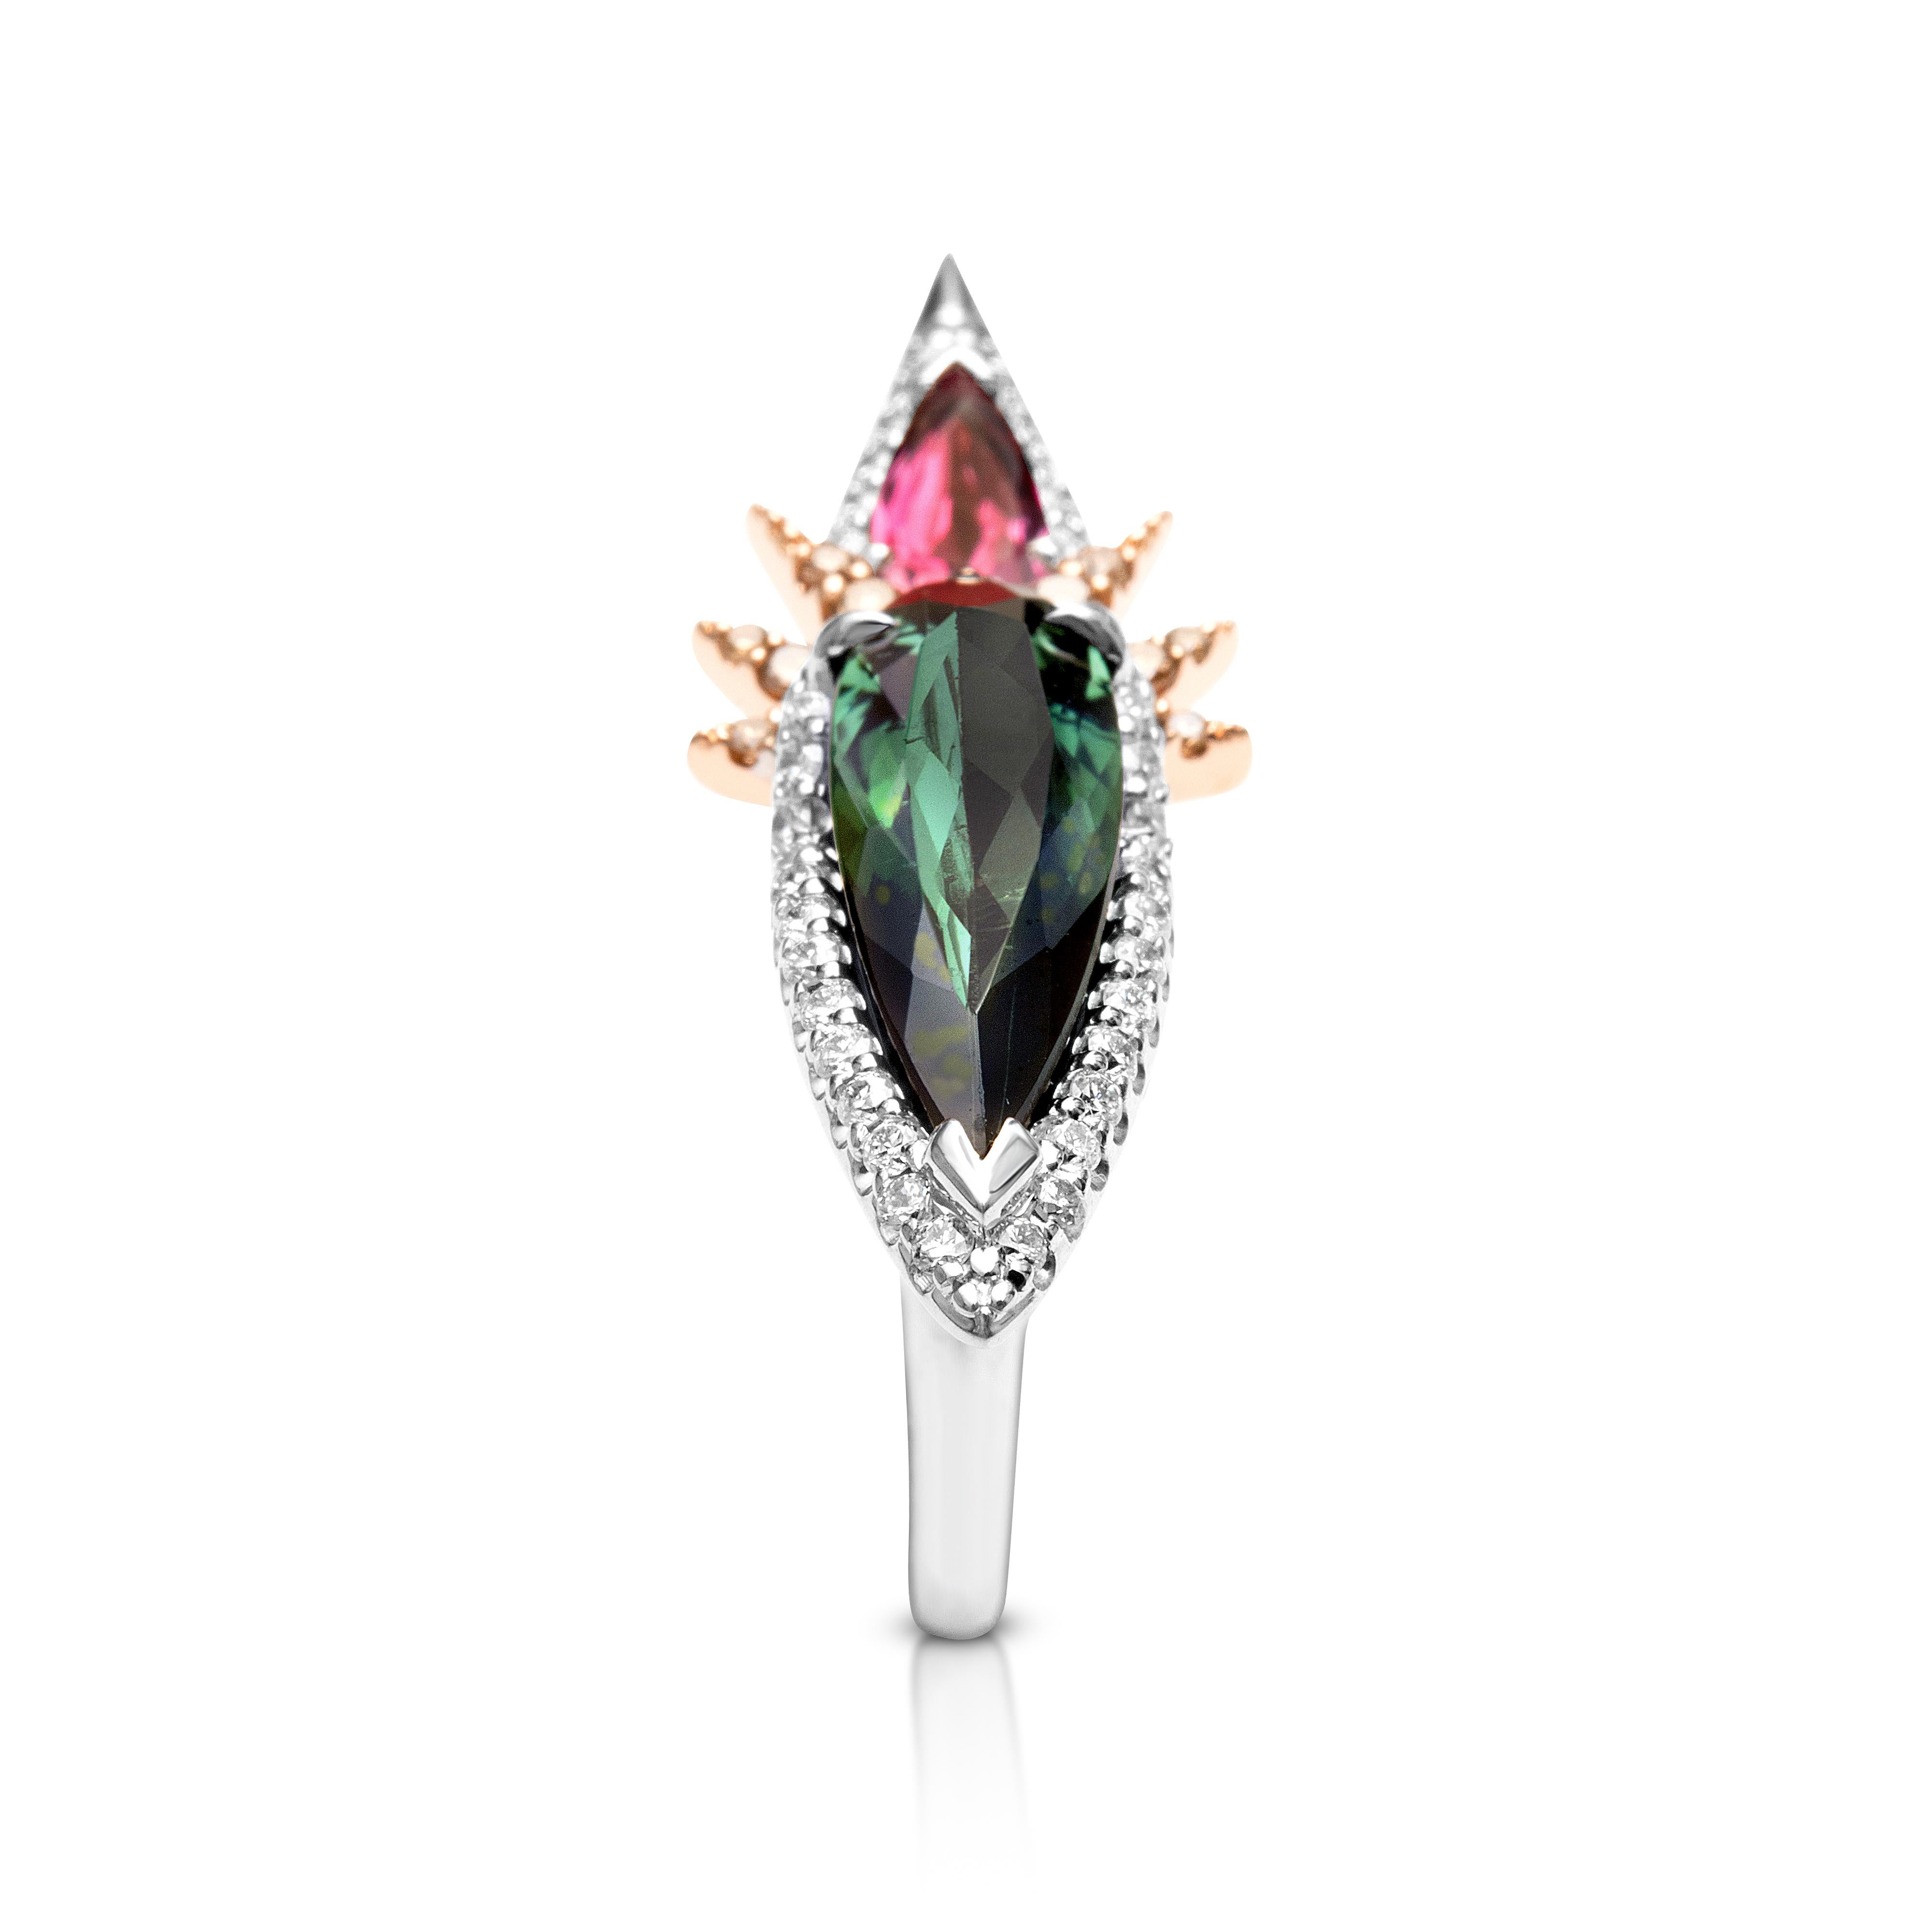 18K White/Rose Gold, Pink/Green Tourmaline Diamond and Cognac Diamond Ring With Filigree Pattern Work, And Heart Detail

-18ct White - Rose Gold  8.3gms
-55 x Round Brilliant Cut Diamonds - Cognac Diamonds F-VS = 0.45ct
-1 x Pear Shaped Pink